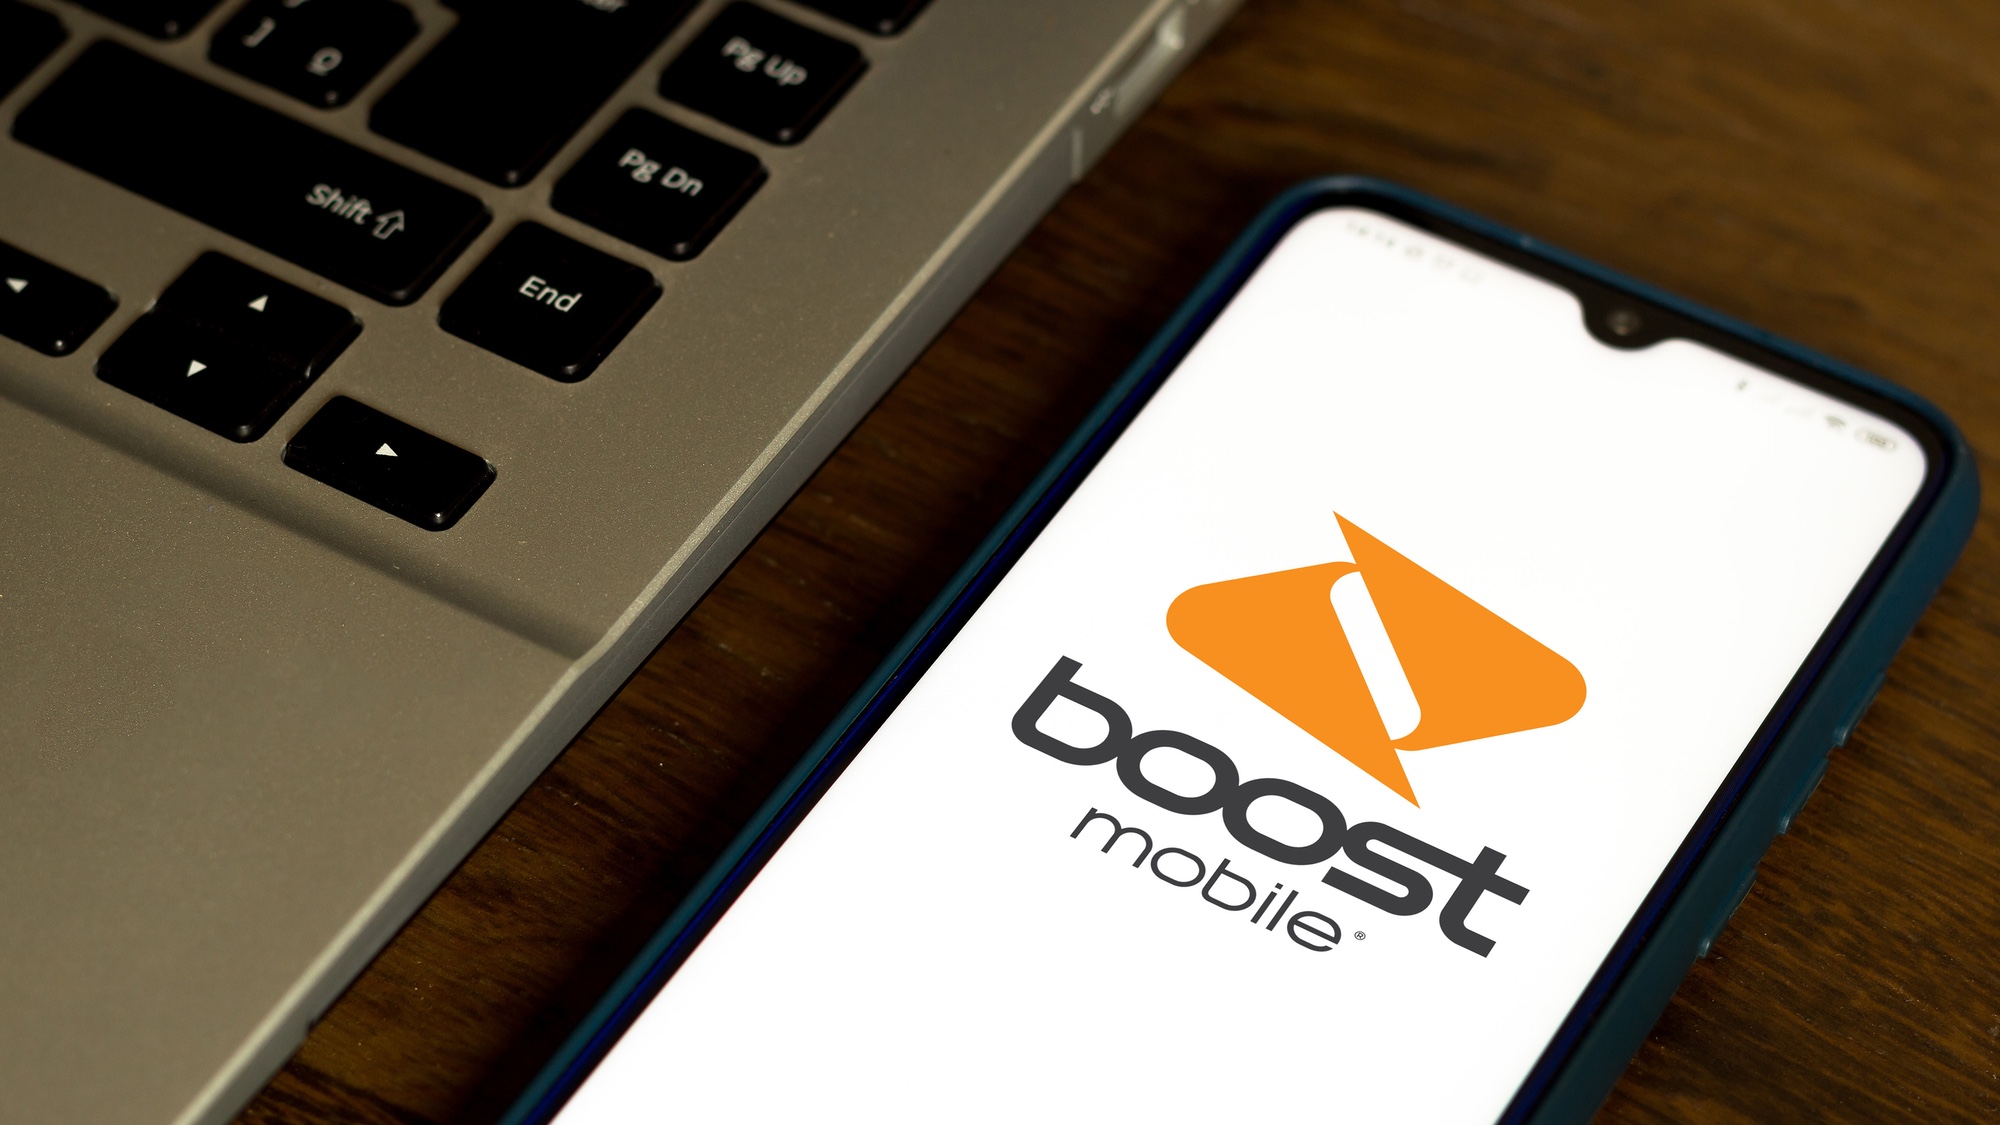 WHO DOES BOOST MOBILE USE